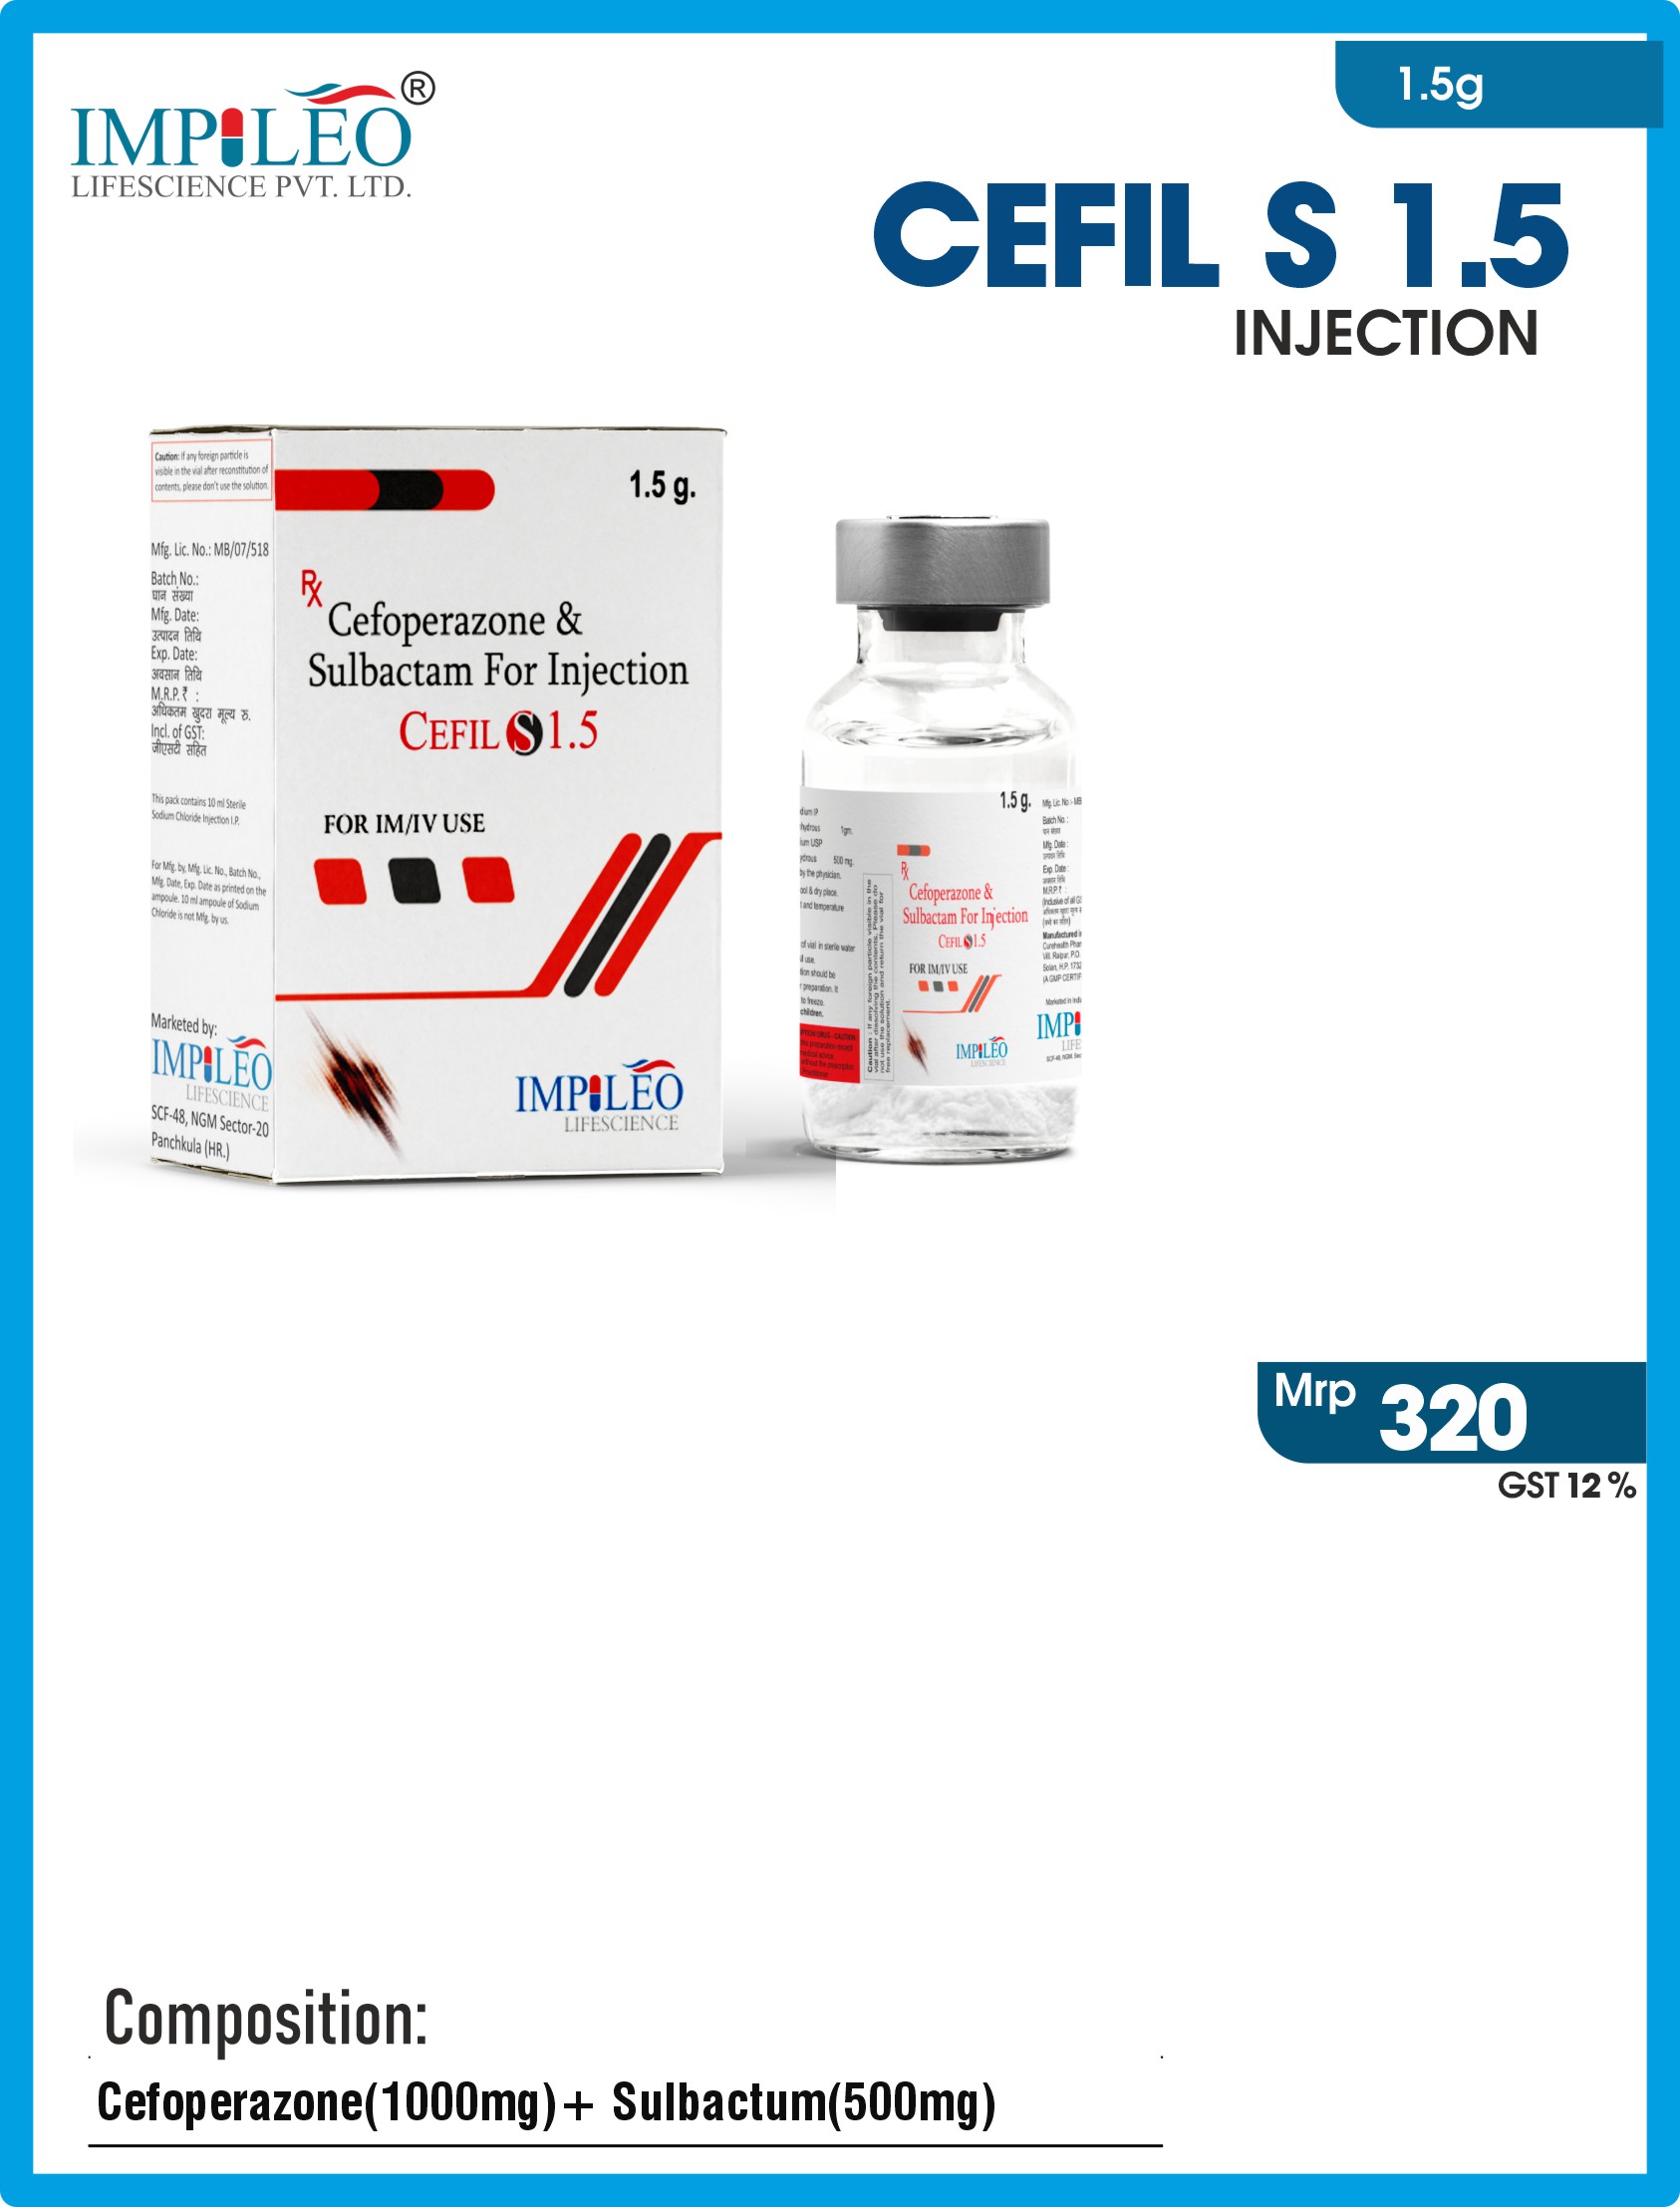 Elevate Your Health: CEFIL S 1.5 Injection - Premier PCD Pharma Franchise in India